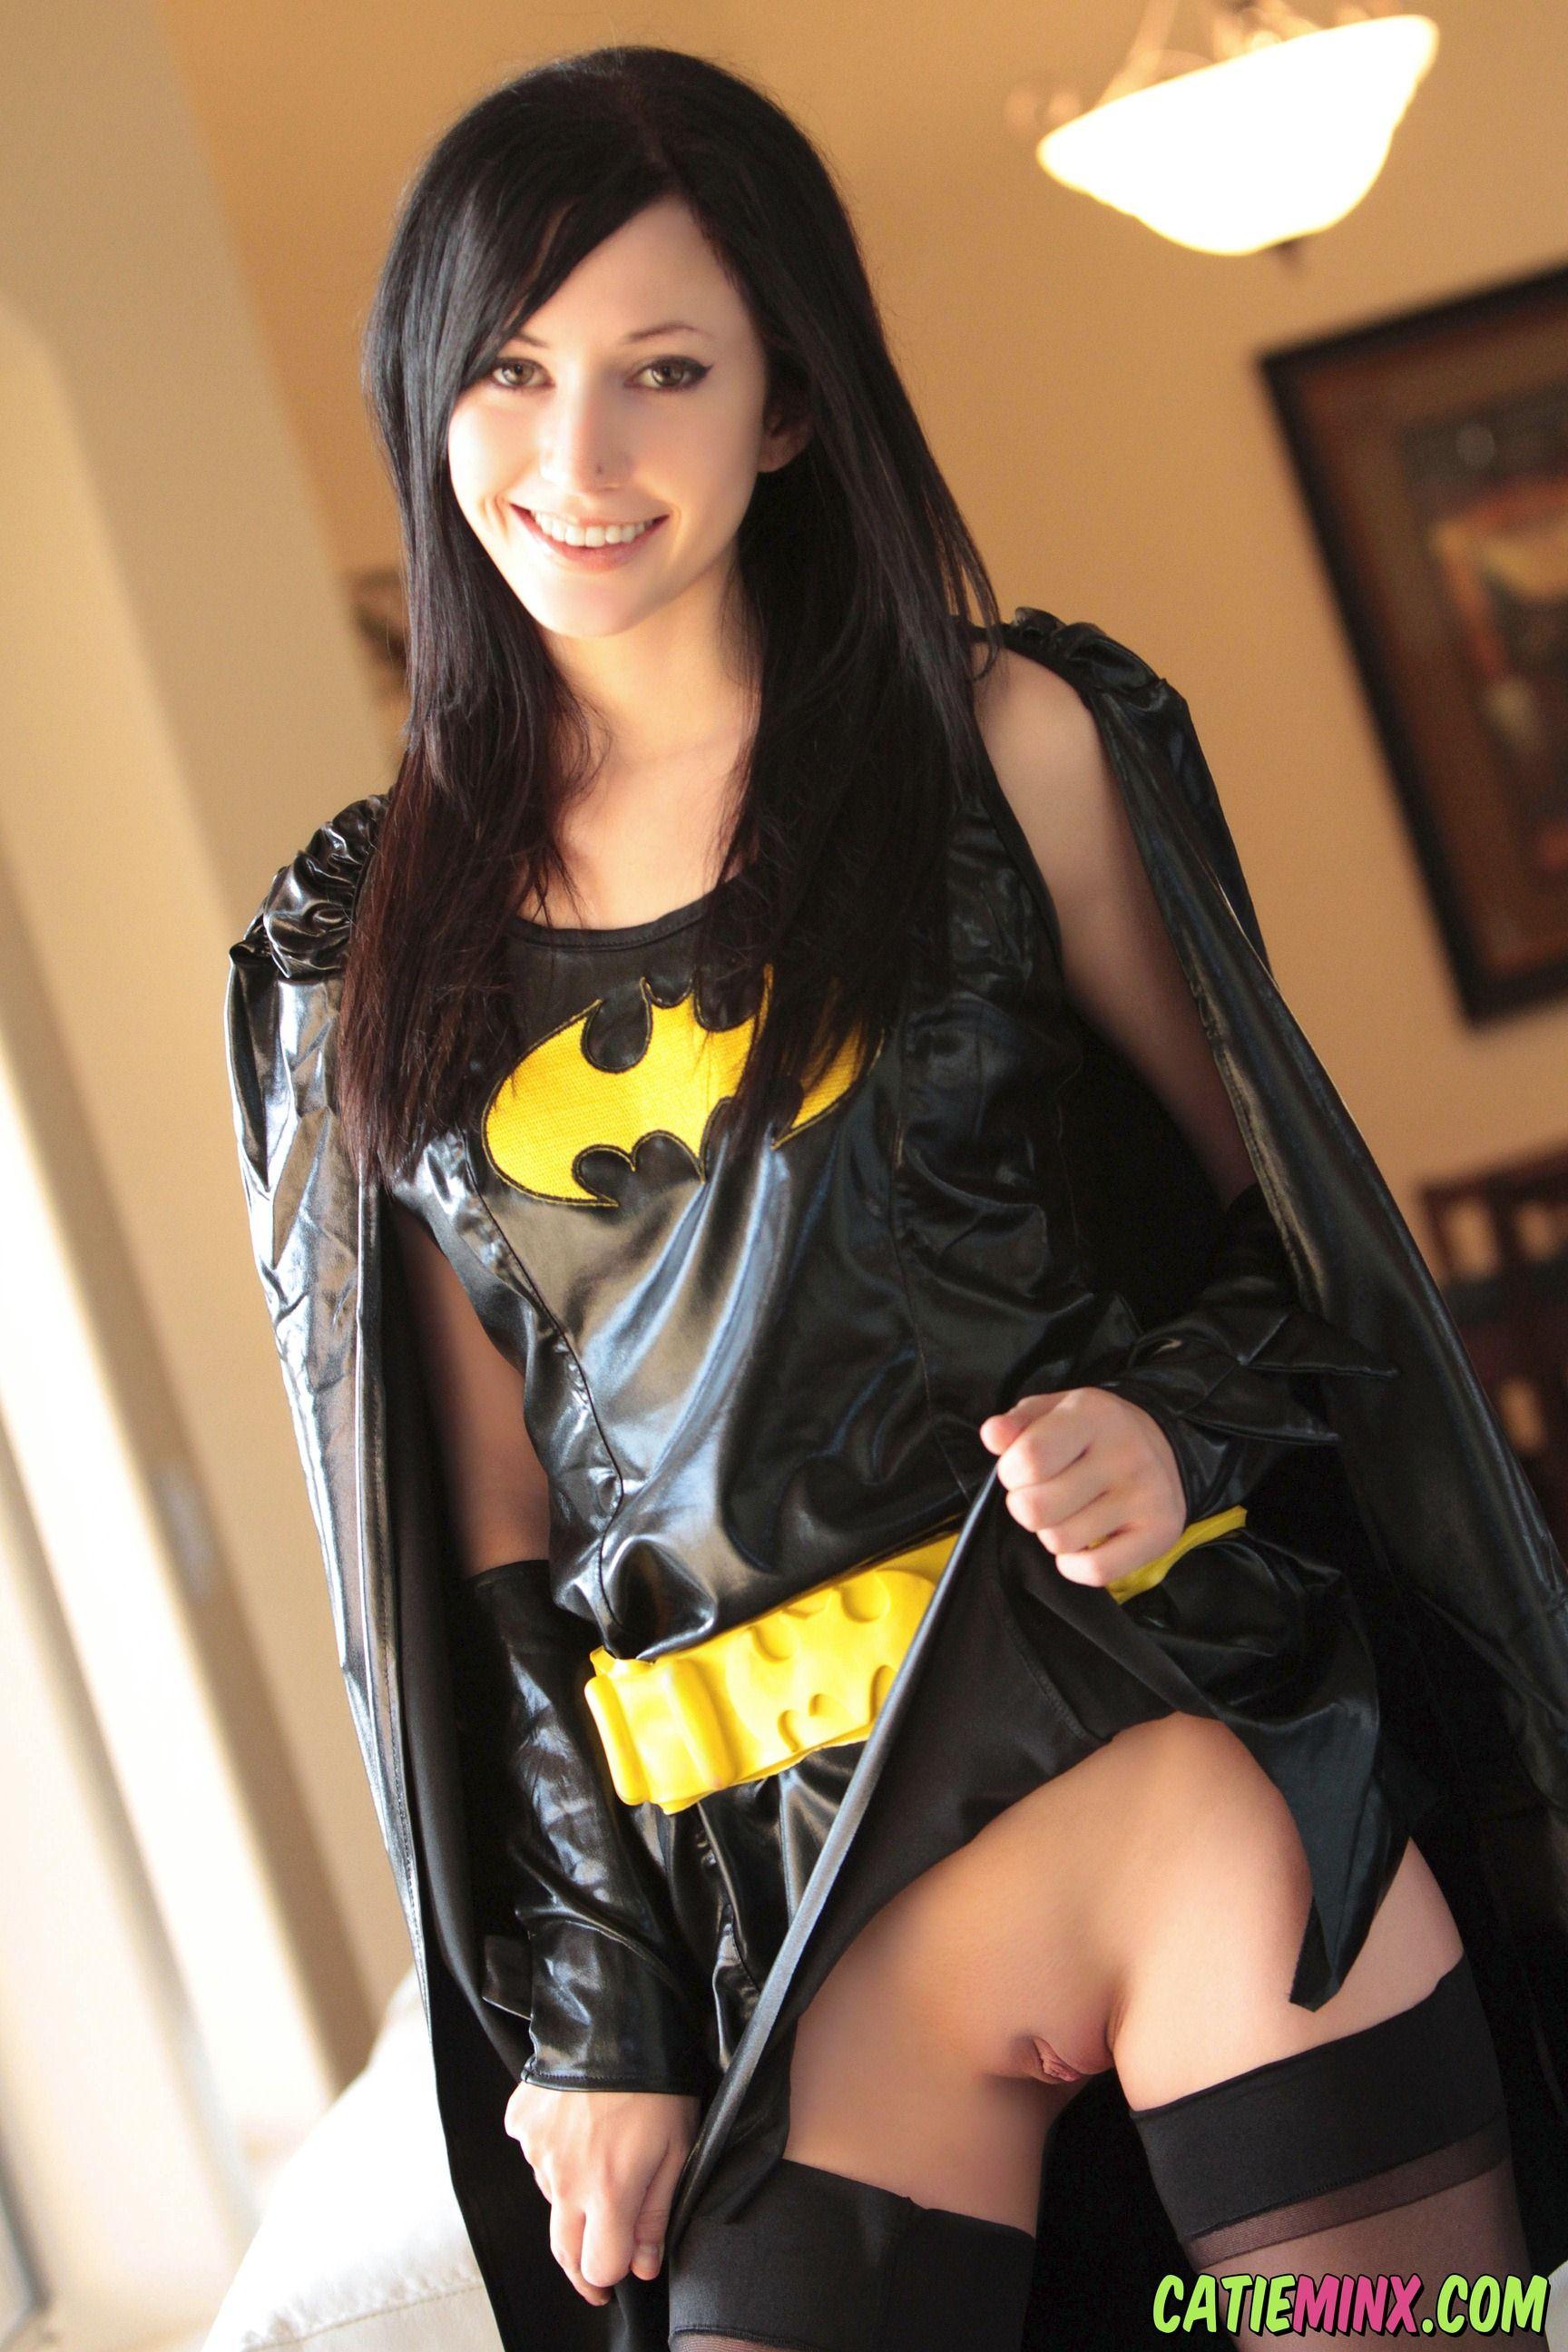 Pictures of Catie Minx celebrating the release of The Dark Knight Rises in style #53727173